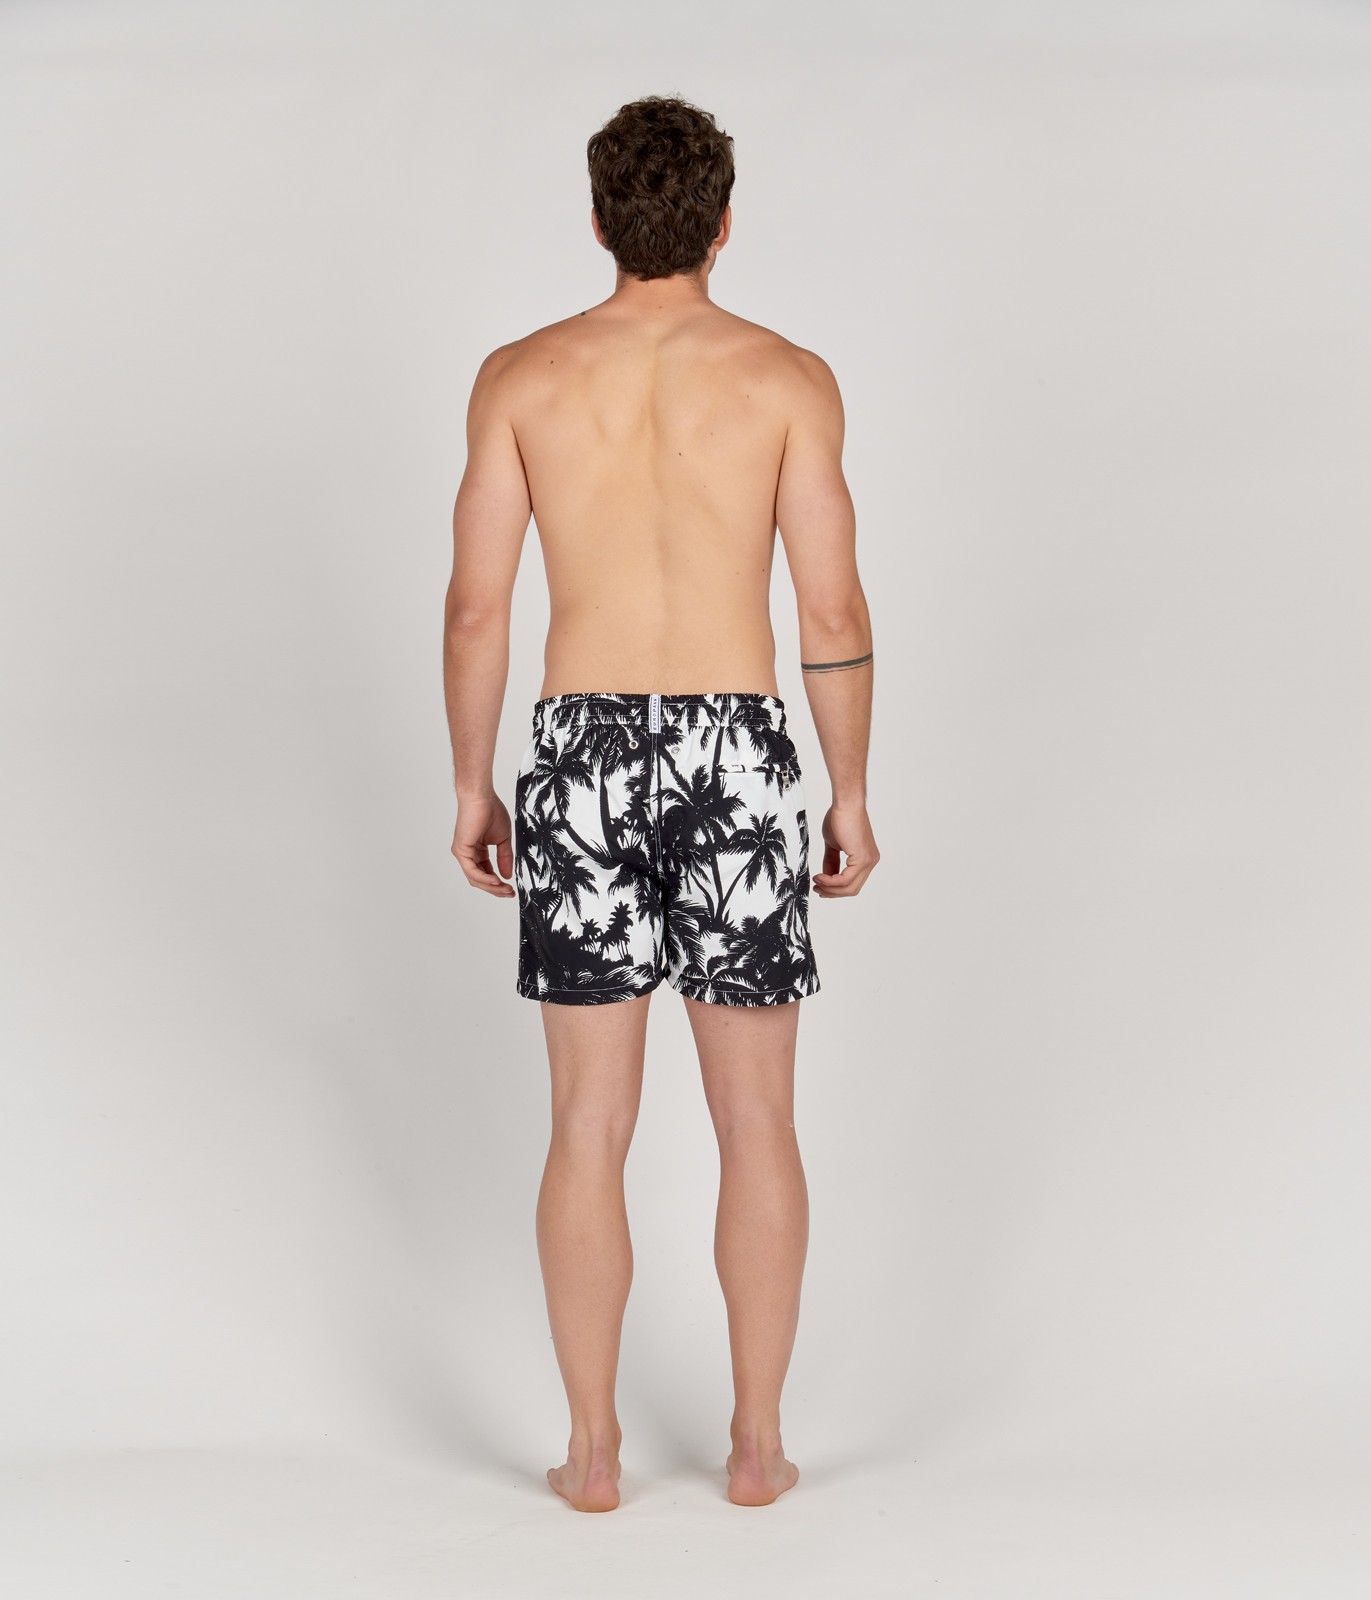 Black palm print swim shorts for men - fitted cut